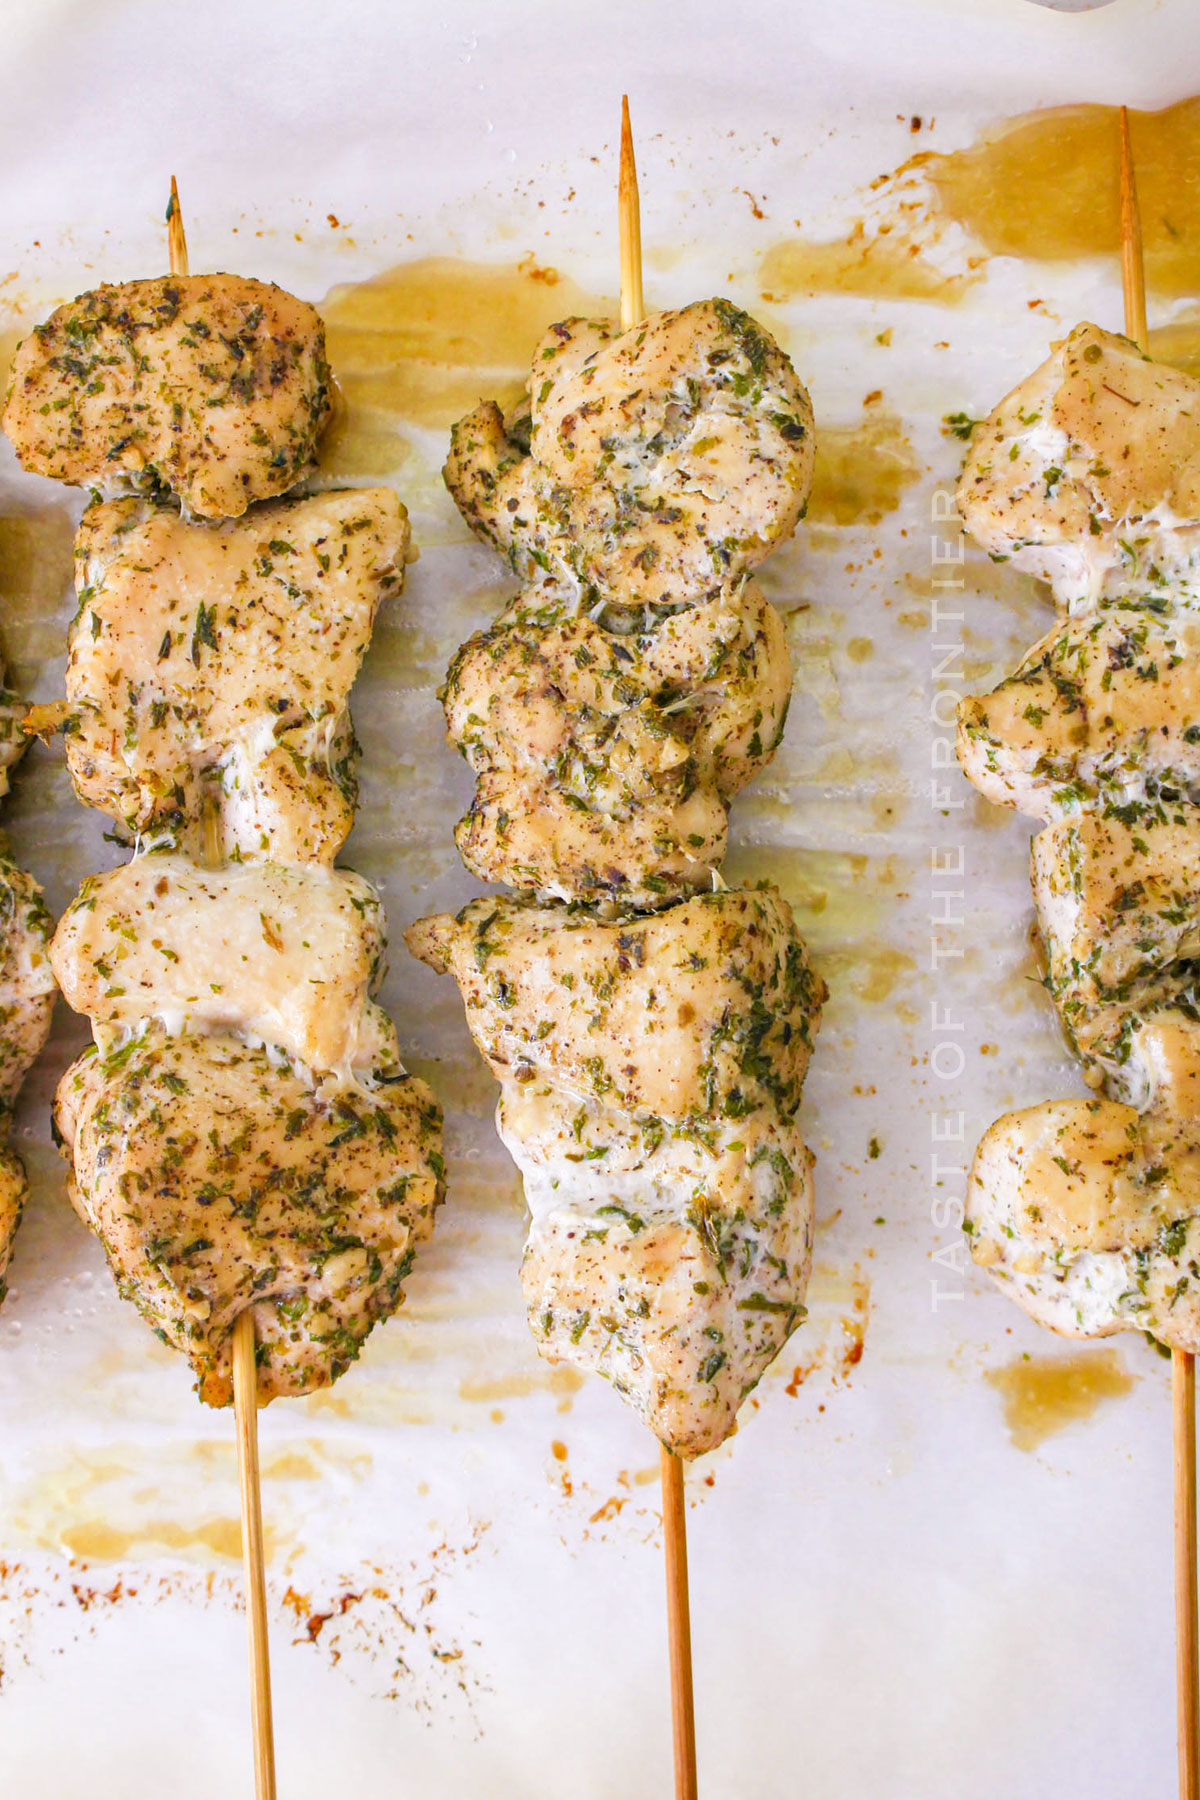 baked chicken on a stick